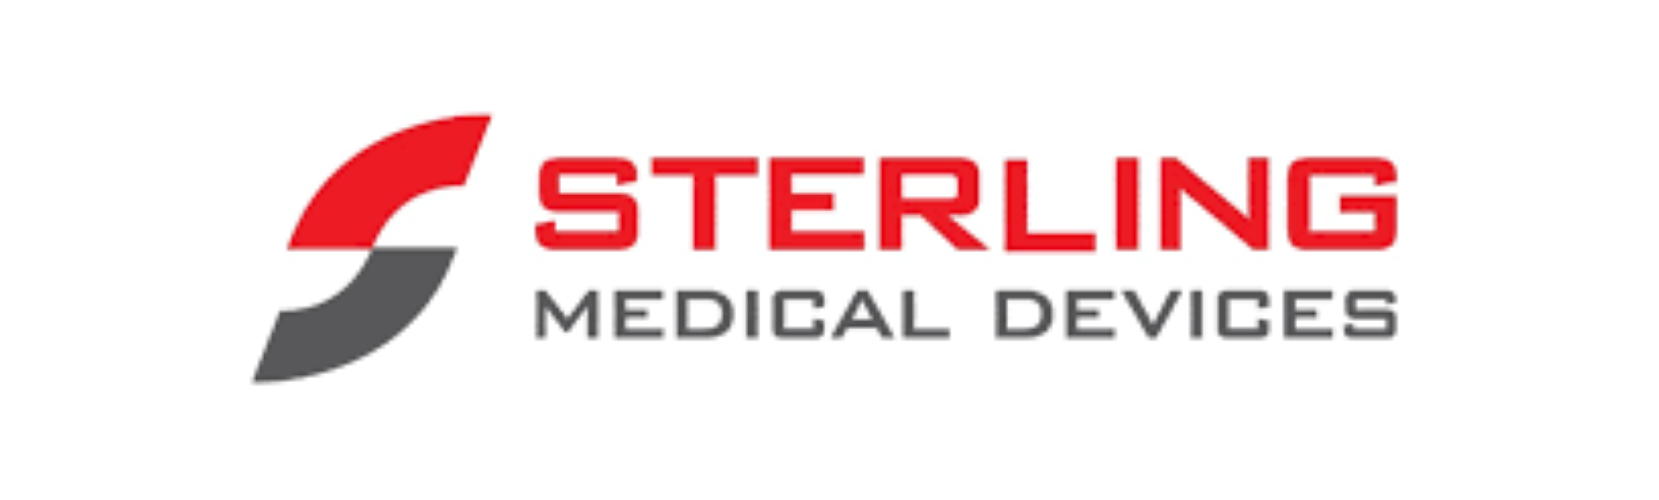 Sterling Medical Devices